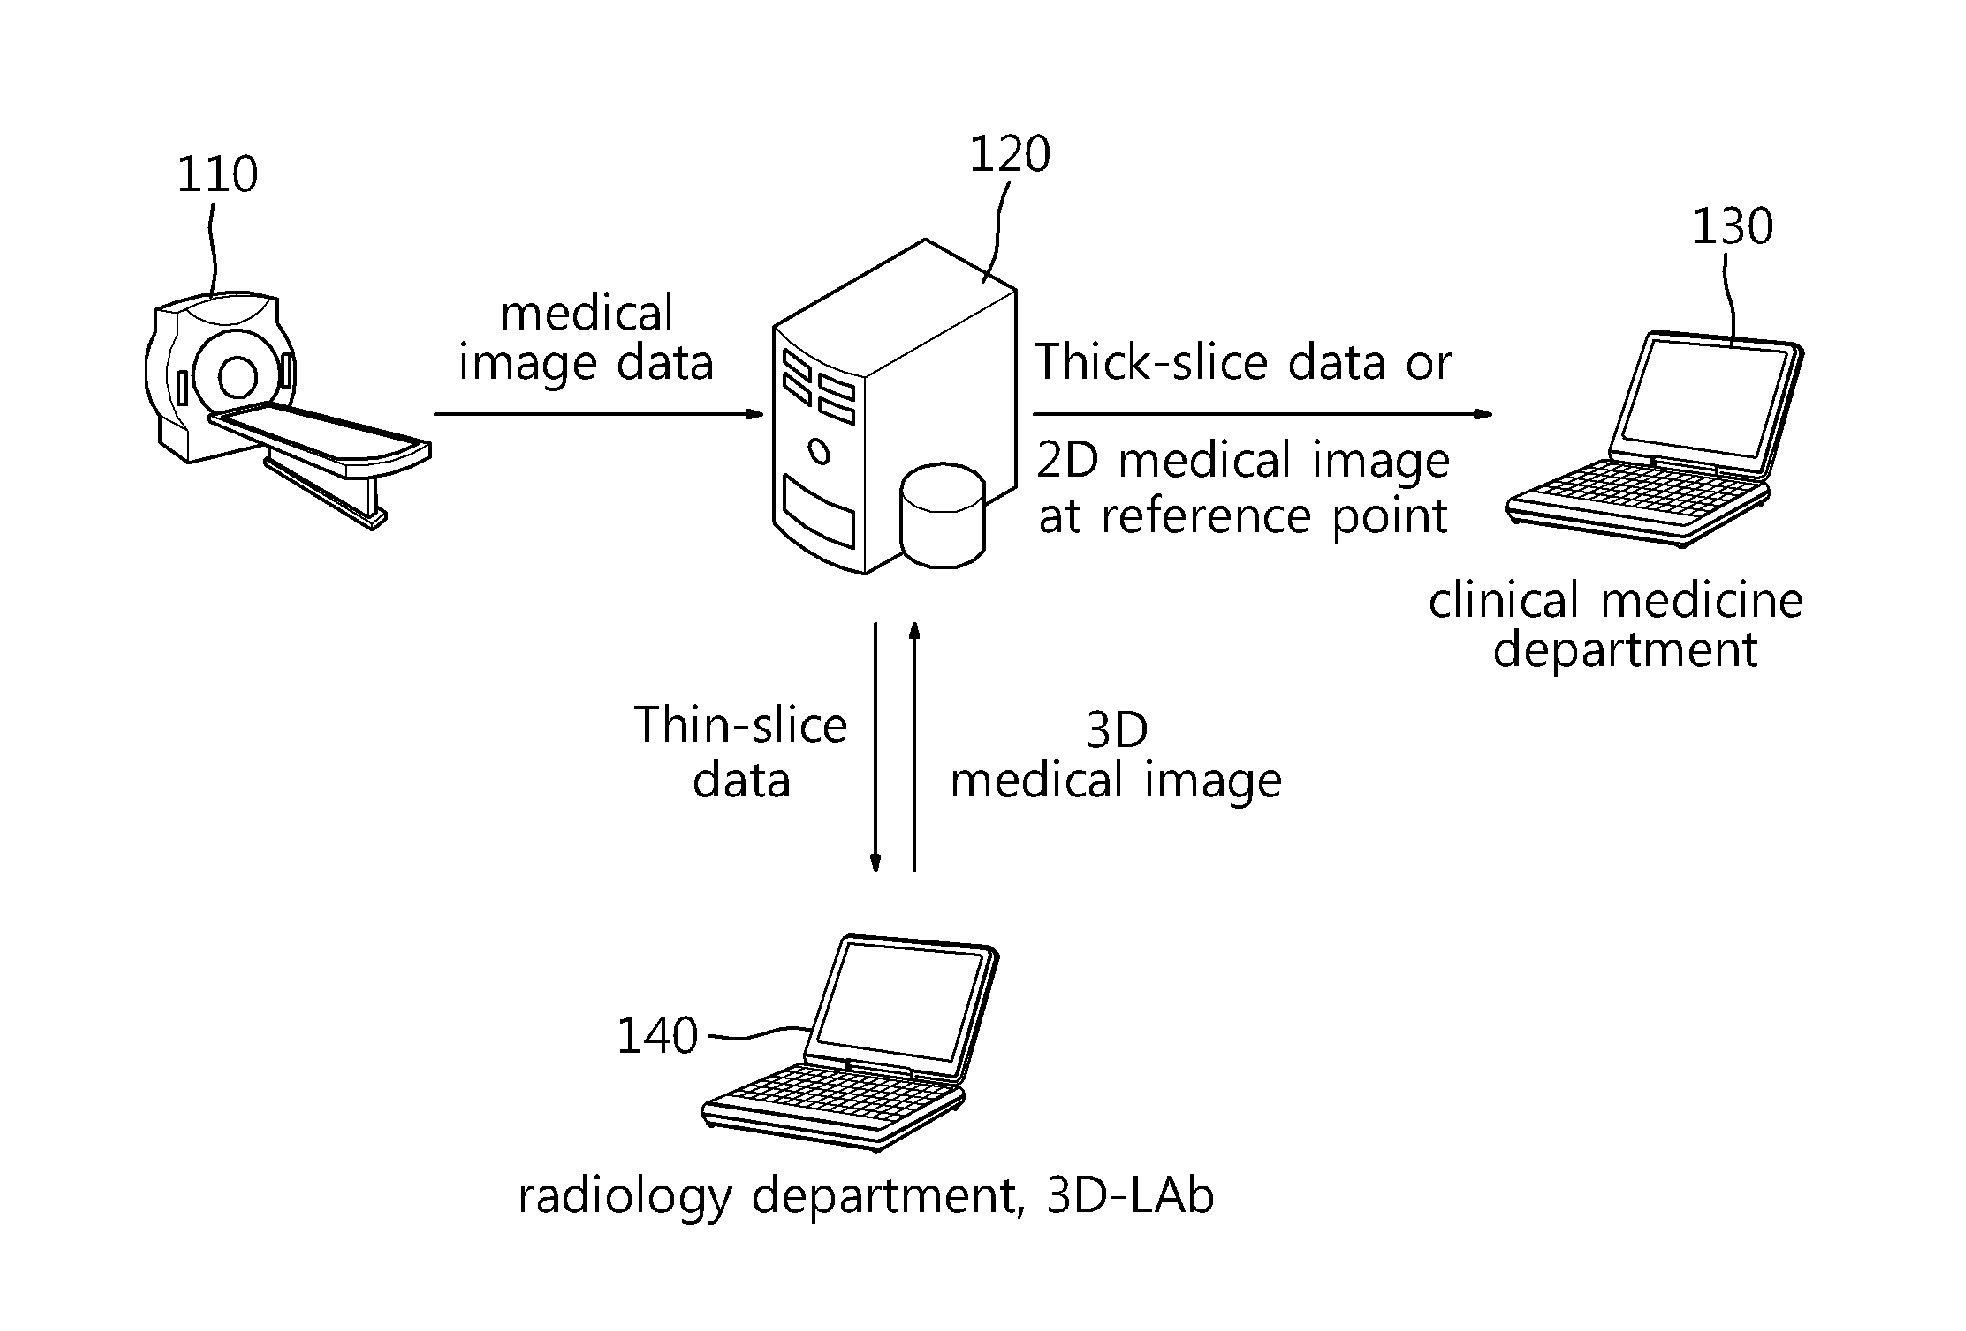 Apparatus for processing, generating, storing and displaying images in picture archiving communication system, and method thereof